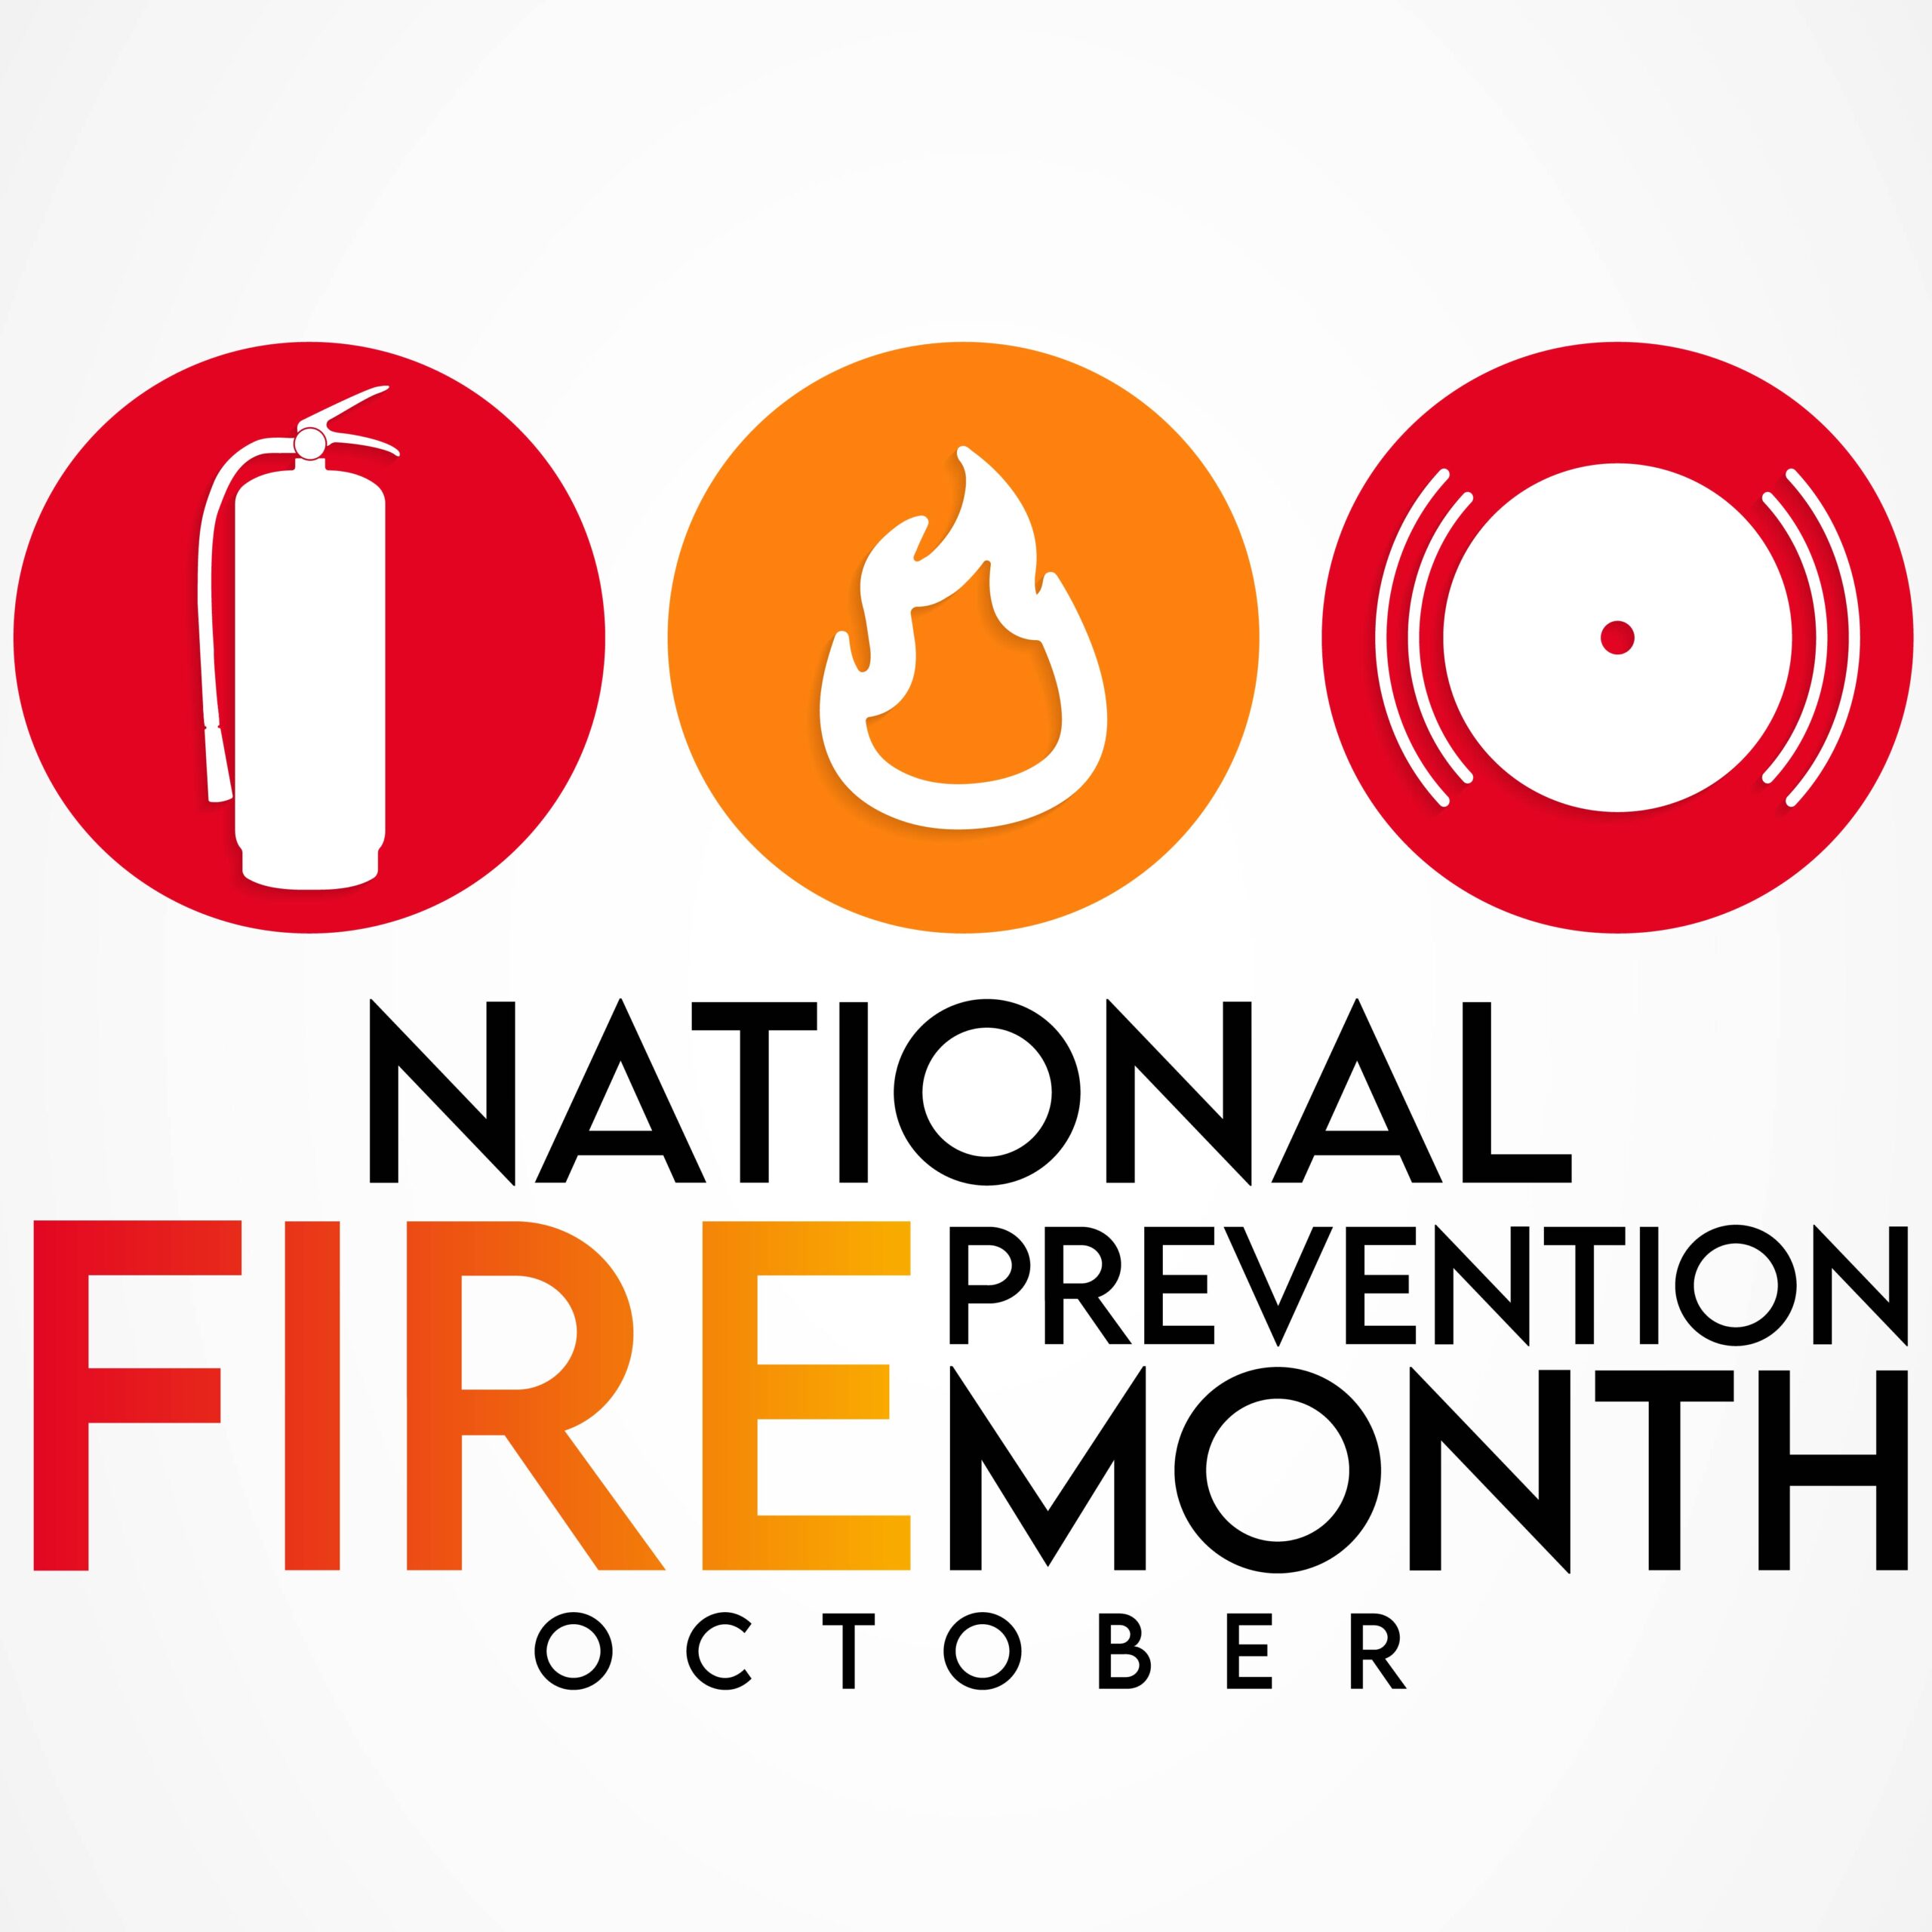 National Fire Prevention Month in October